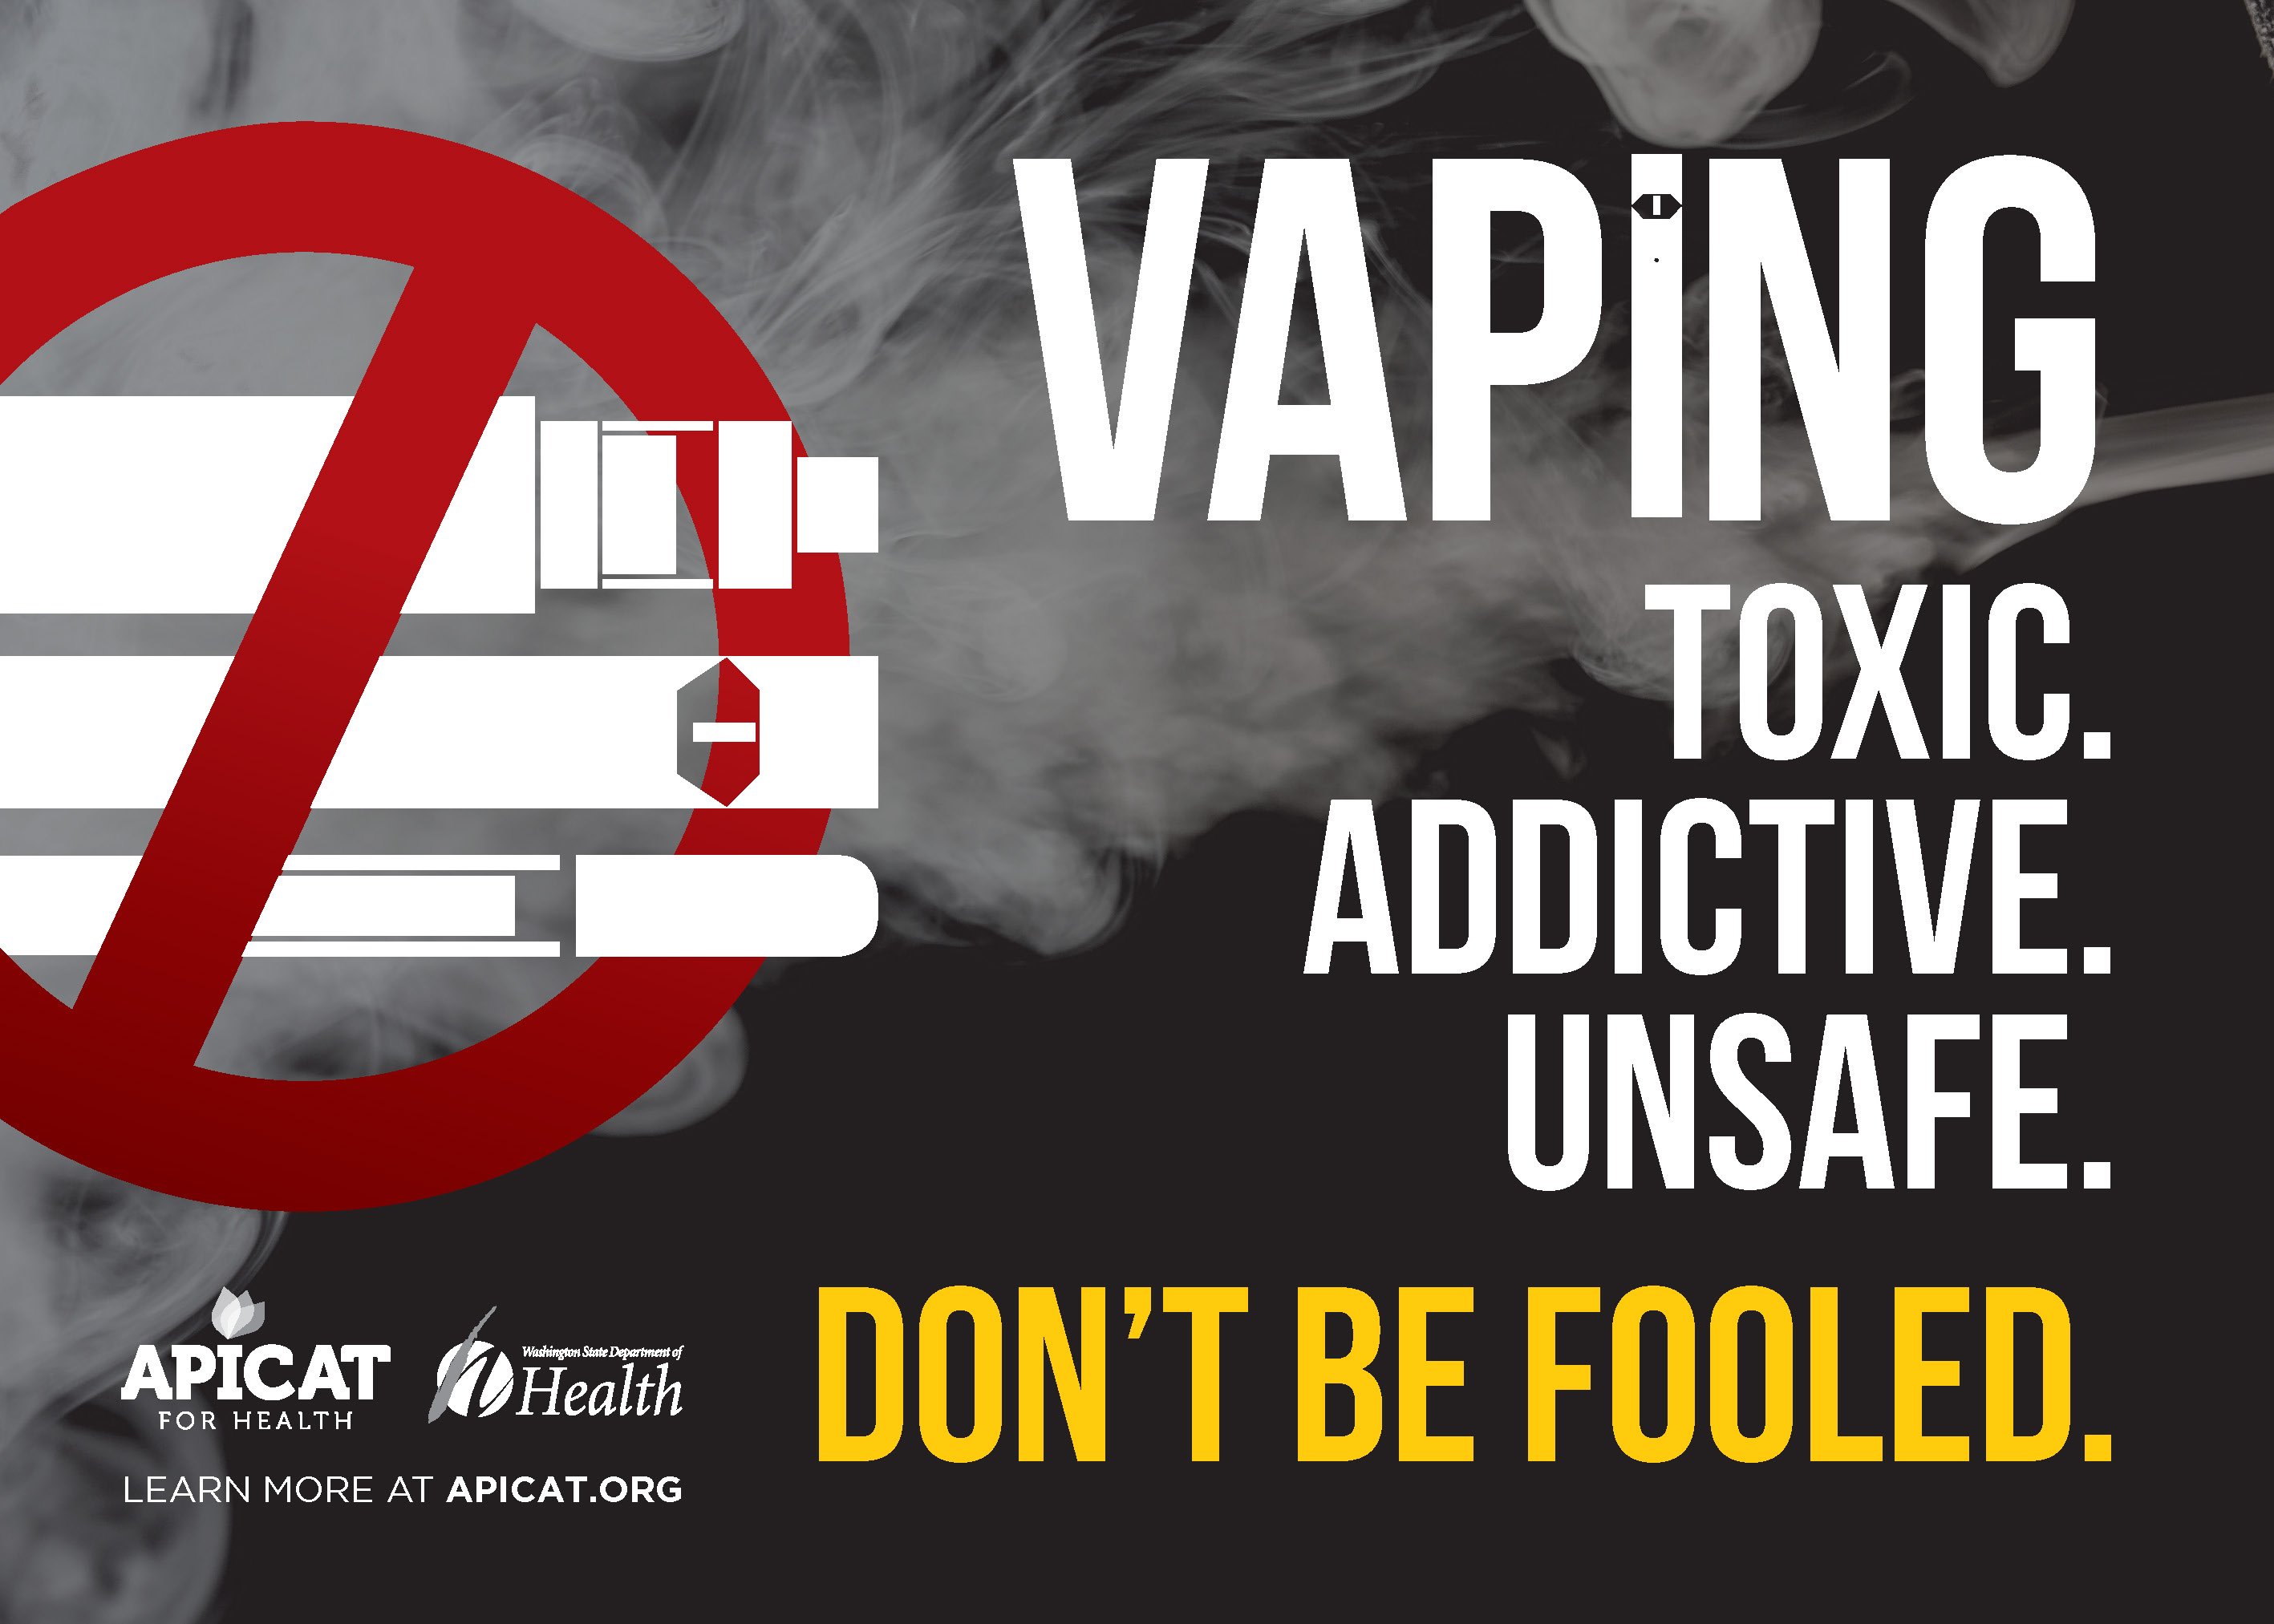 Vaping: Toxic. Addictive. Unsafe. Don't be fooled. 